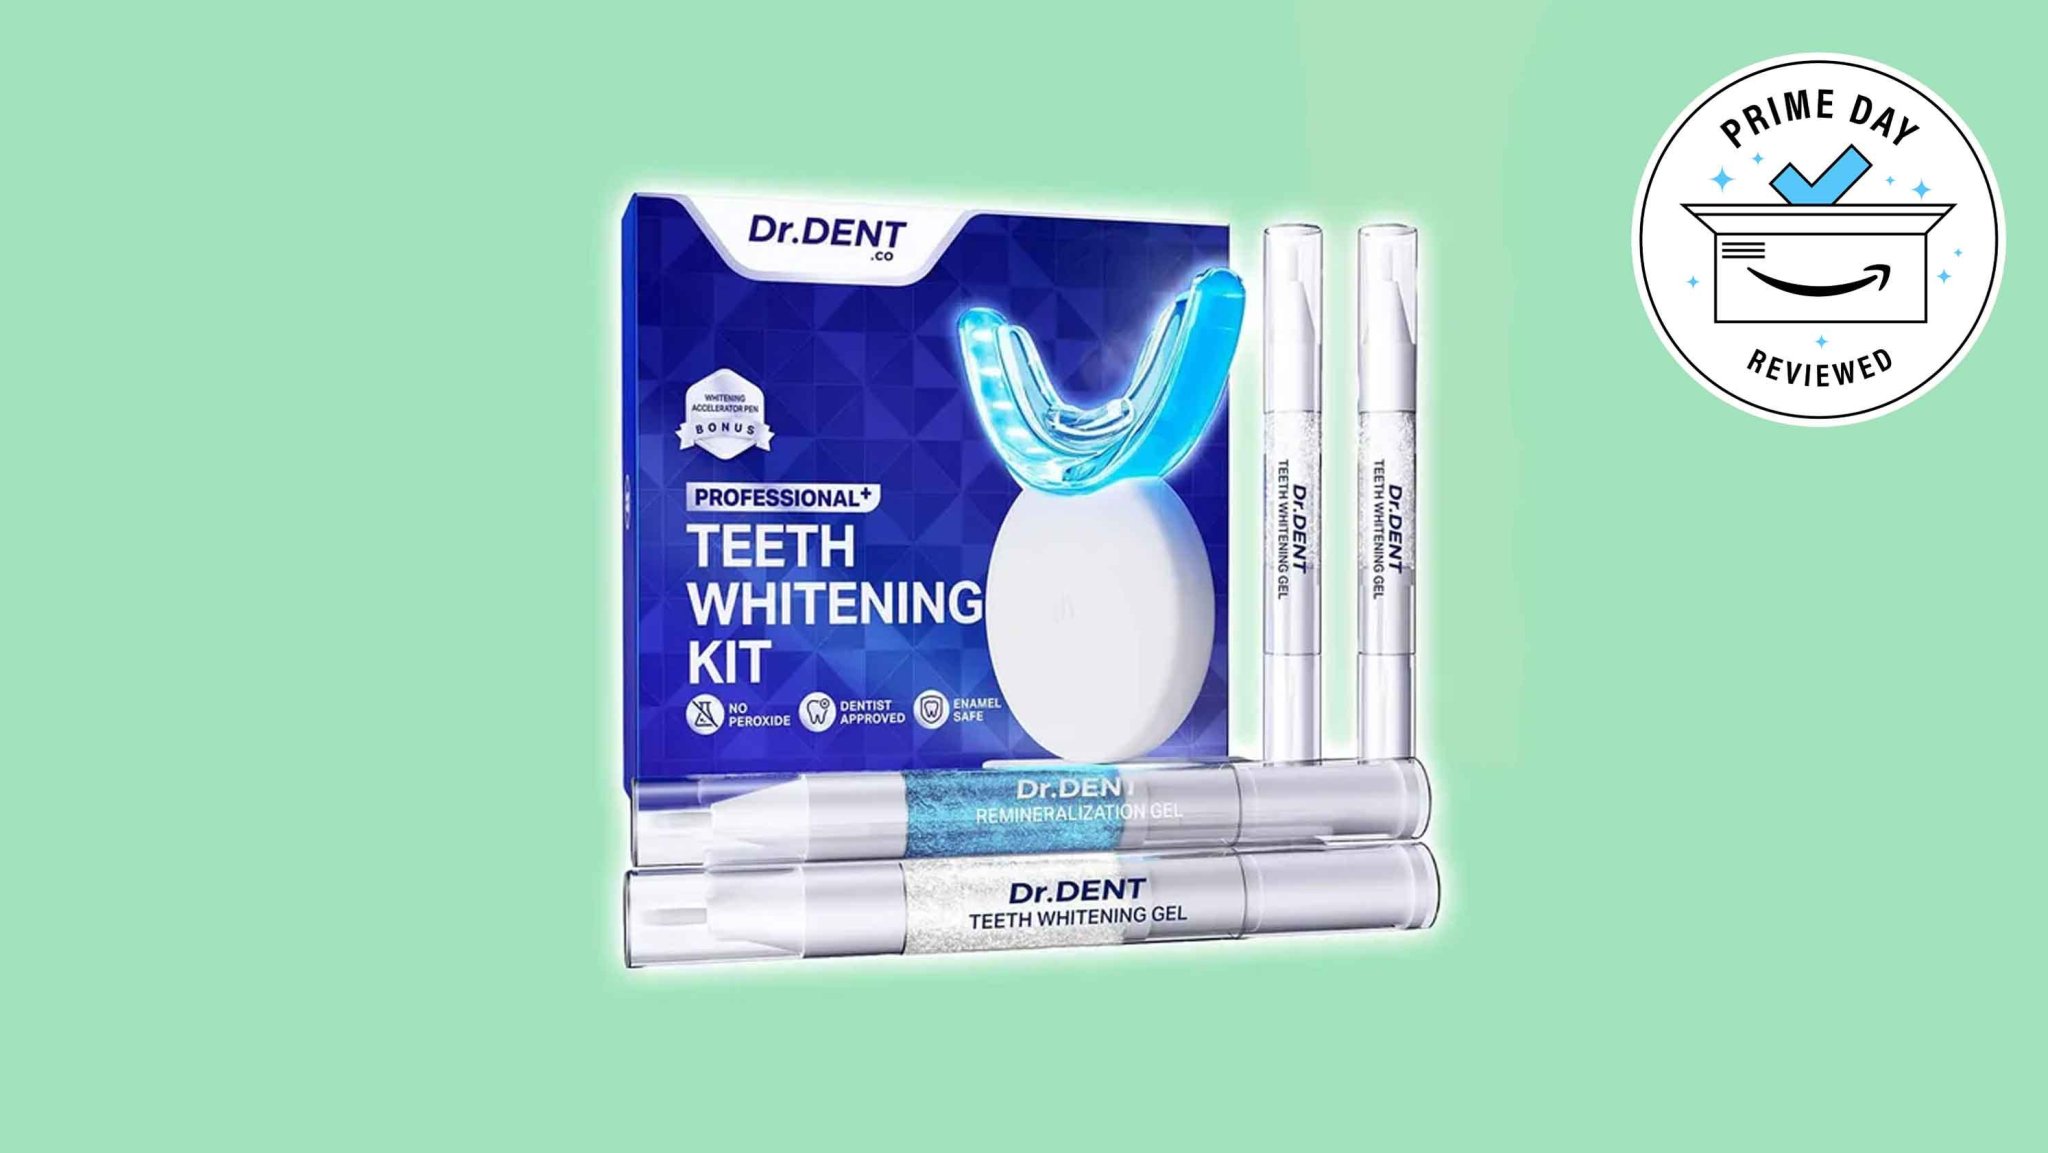 We found a sparkly early Amazon Prime Day deal on a professional LED teeth whitening kit